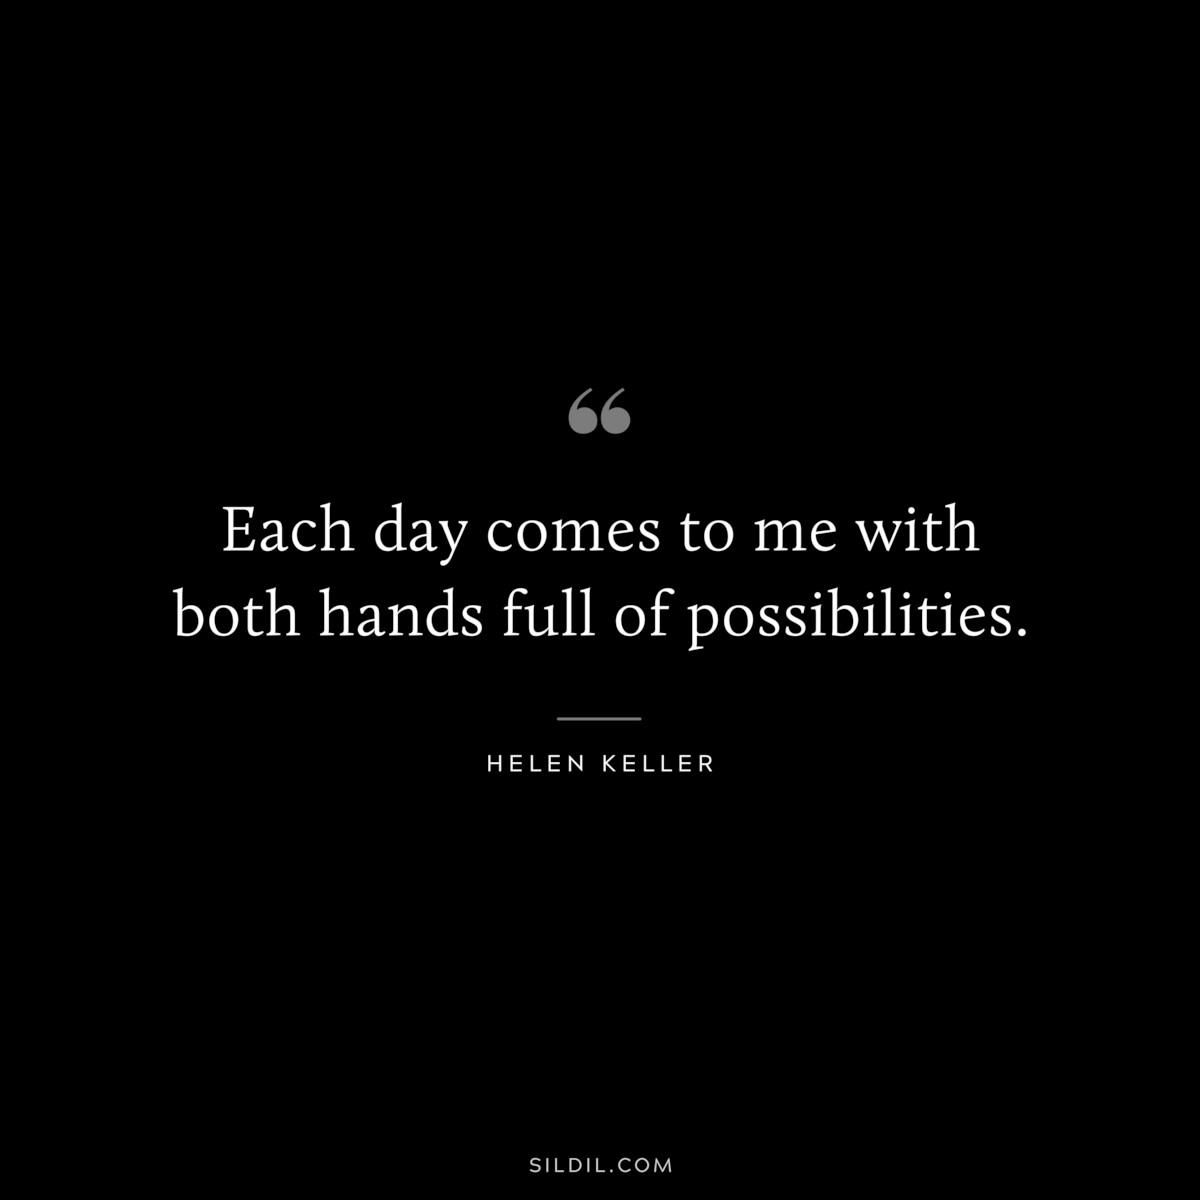 Each day comes to me with both hands full of possibilities. ― Helen Keller